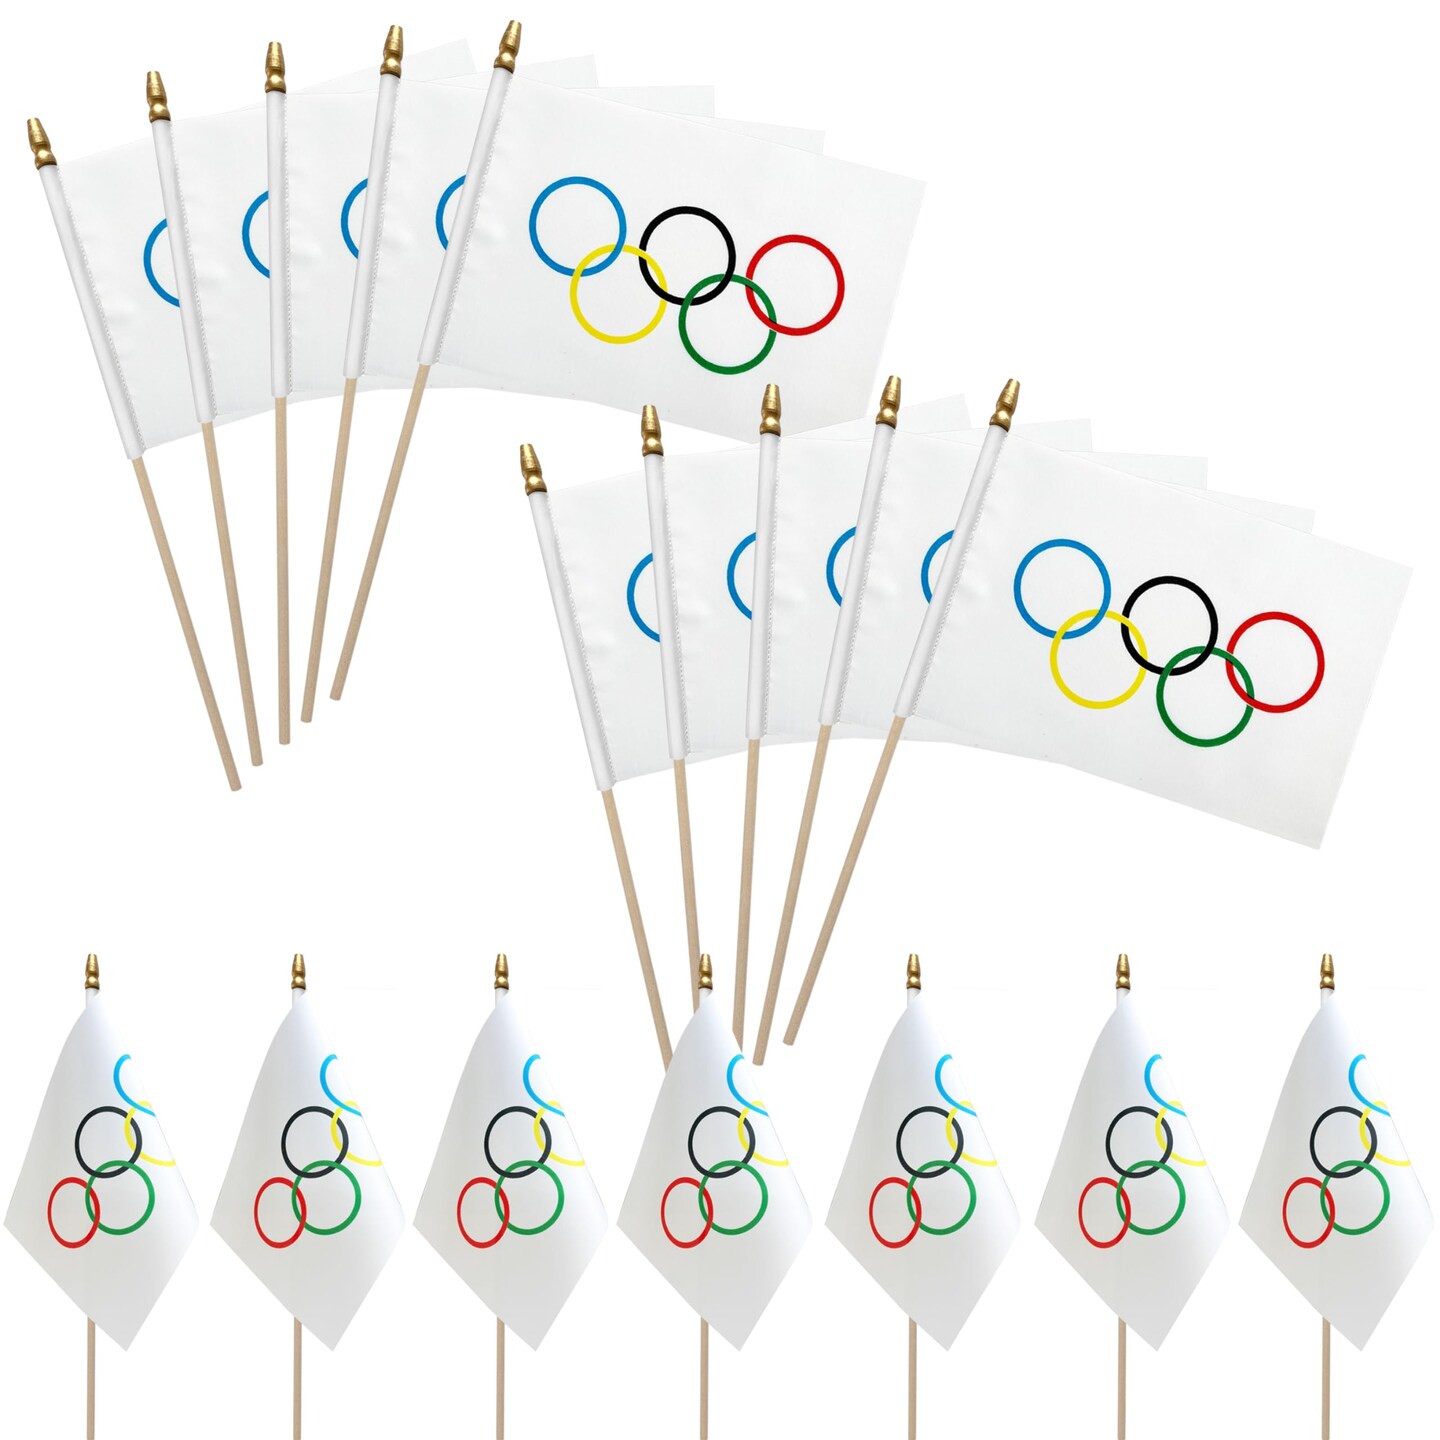 LoveVC 20 Pack Olympic Games Flags on Wood Stick Olympic Rings Small Mini Hand Held Flag Decorations,5x8 Inch